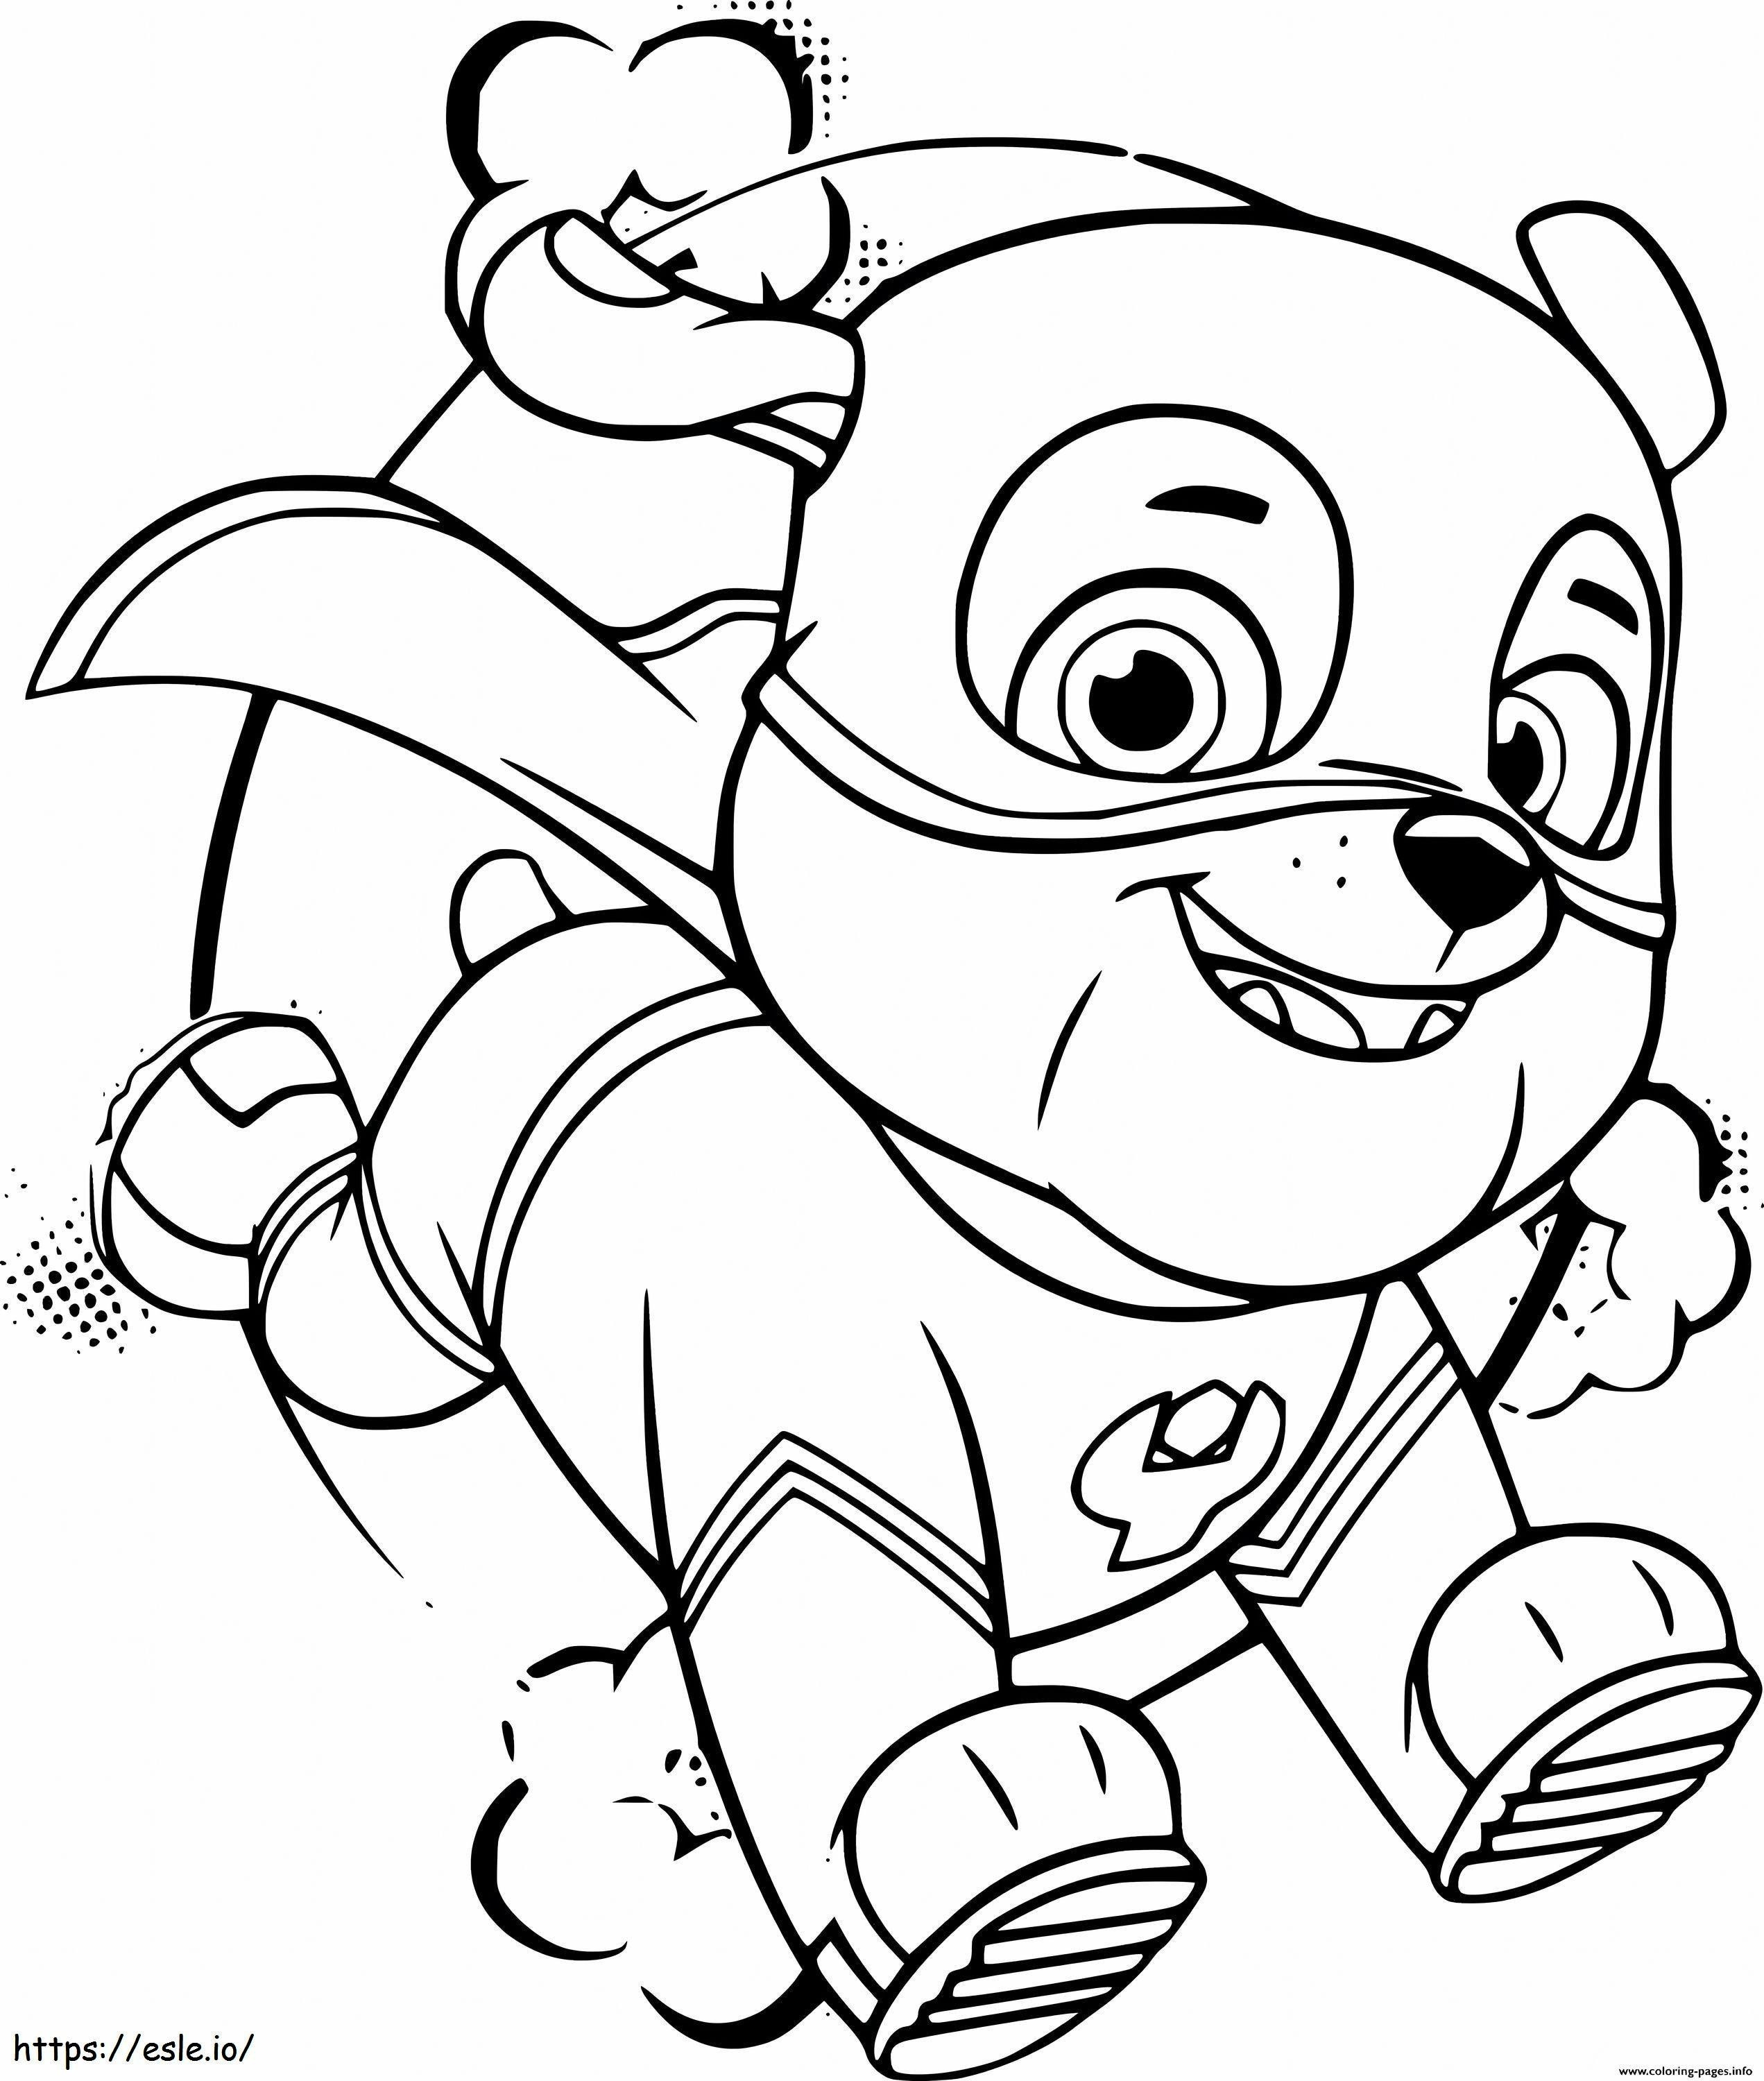 Bulldog Running Scaled coloring page